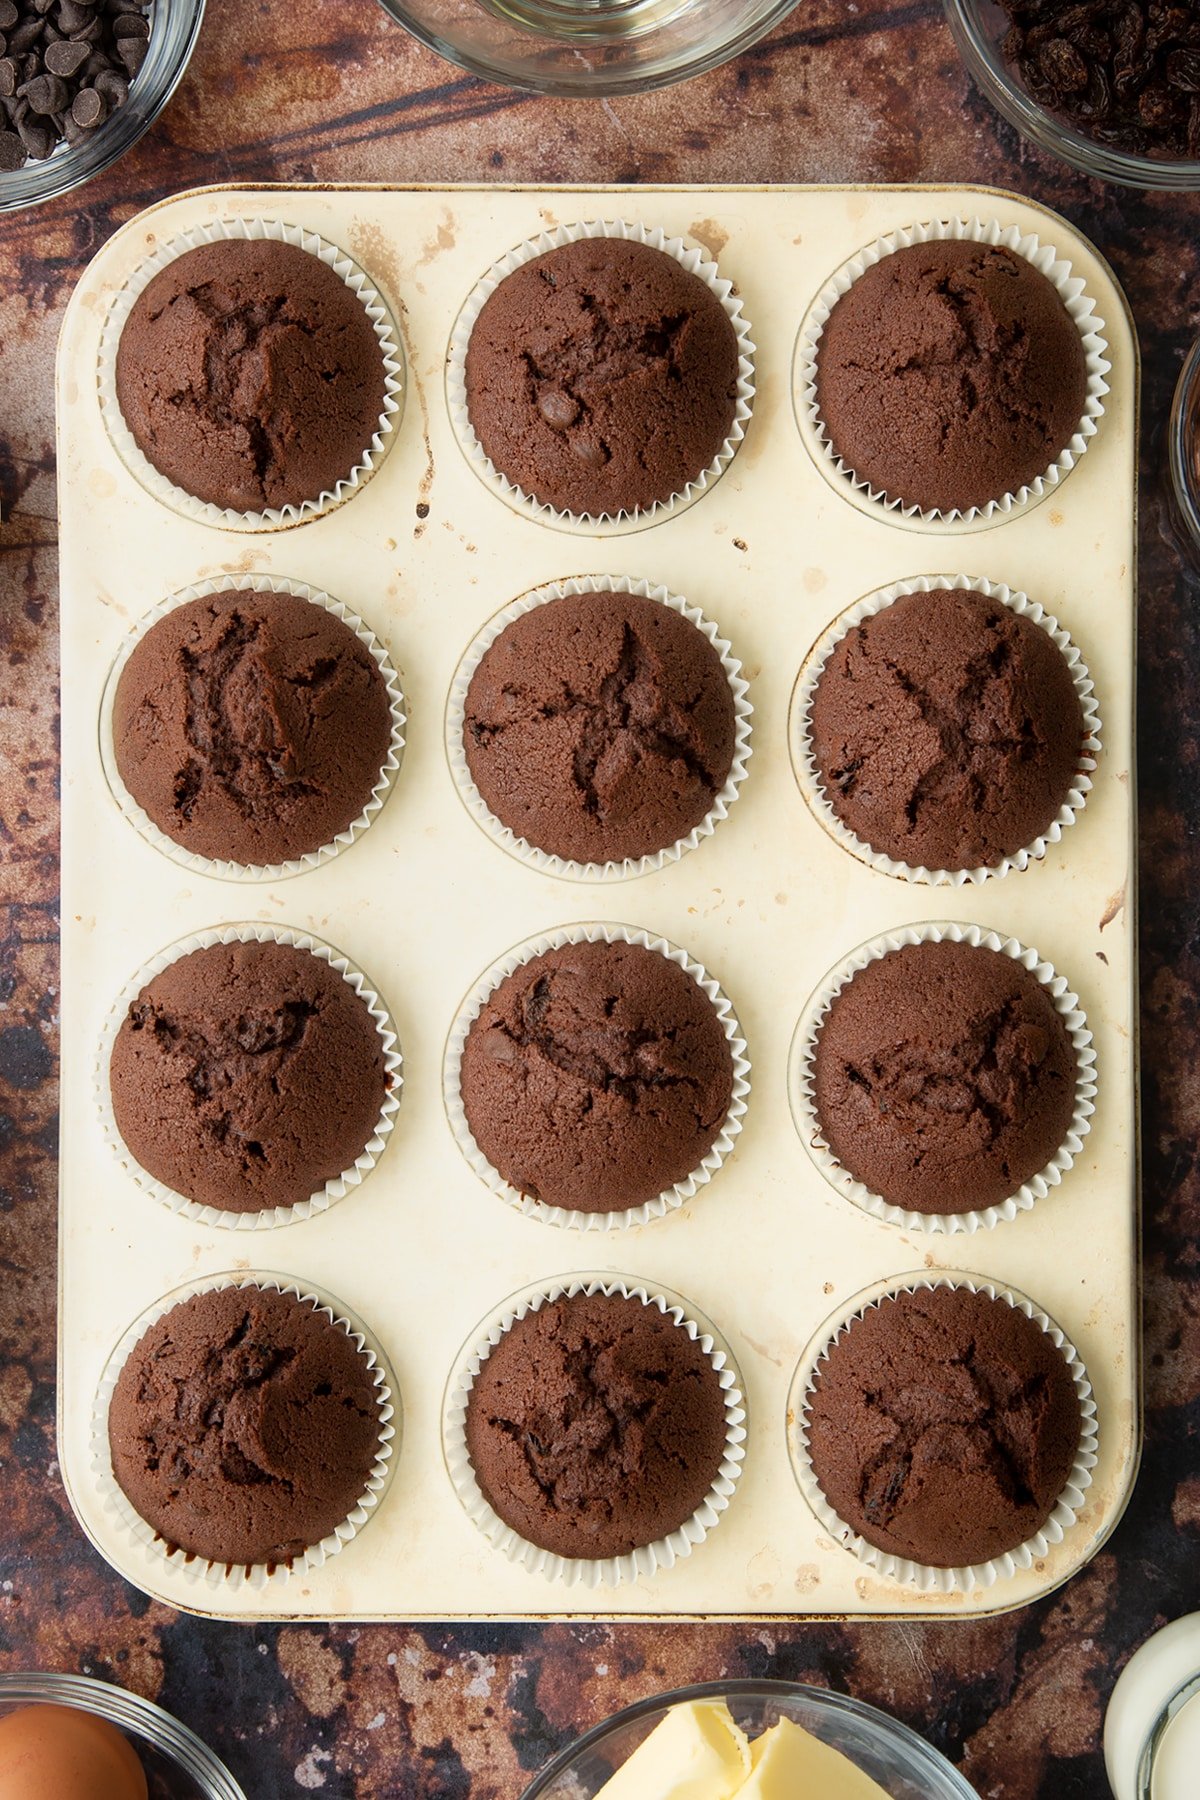 Freshly baked chocolate raisin muffins in a tray.